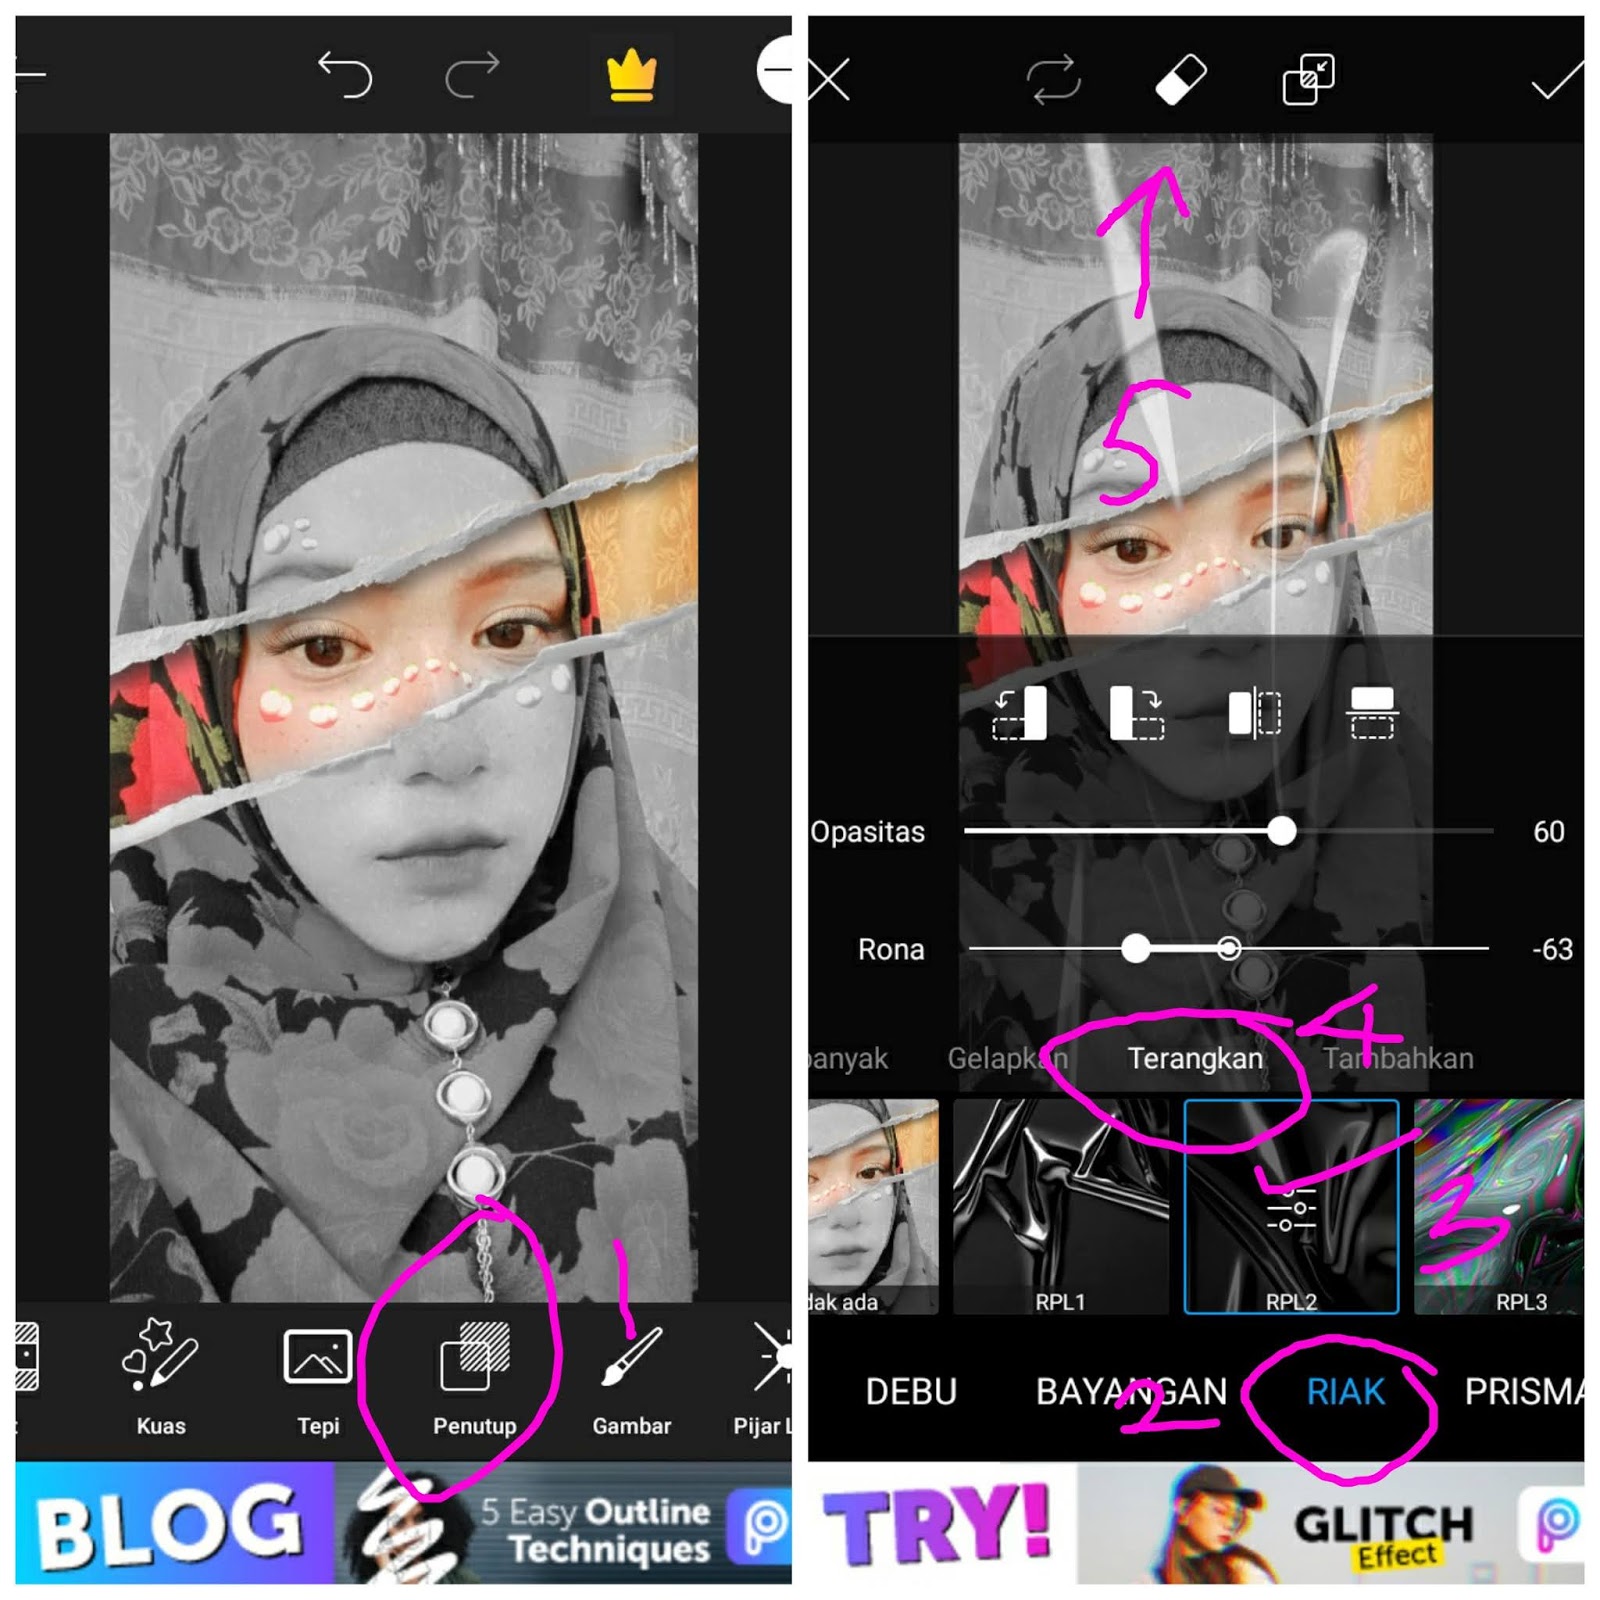 Make Melting Picture With Picsart - Art, Graphics & Video - Nigeria